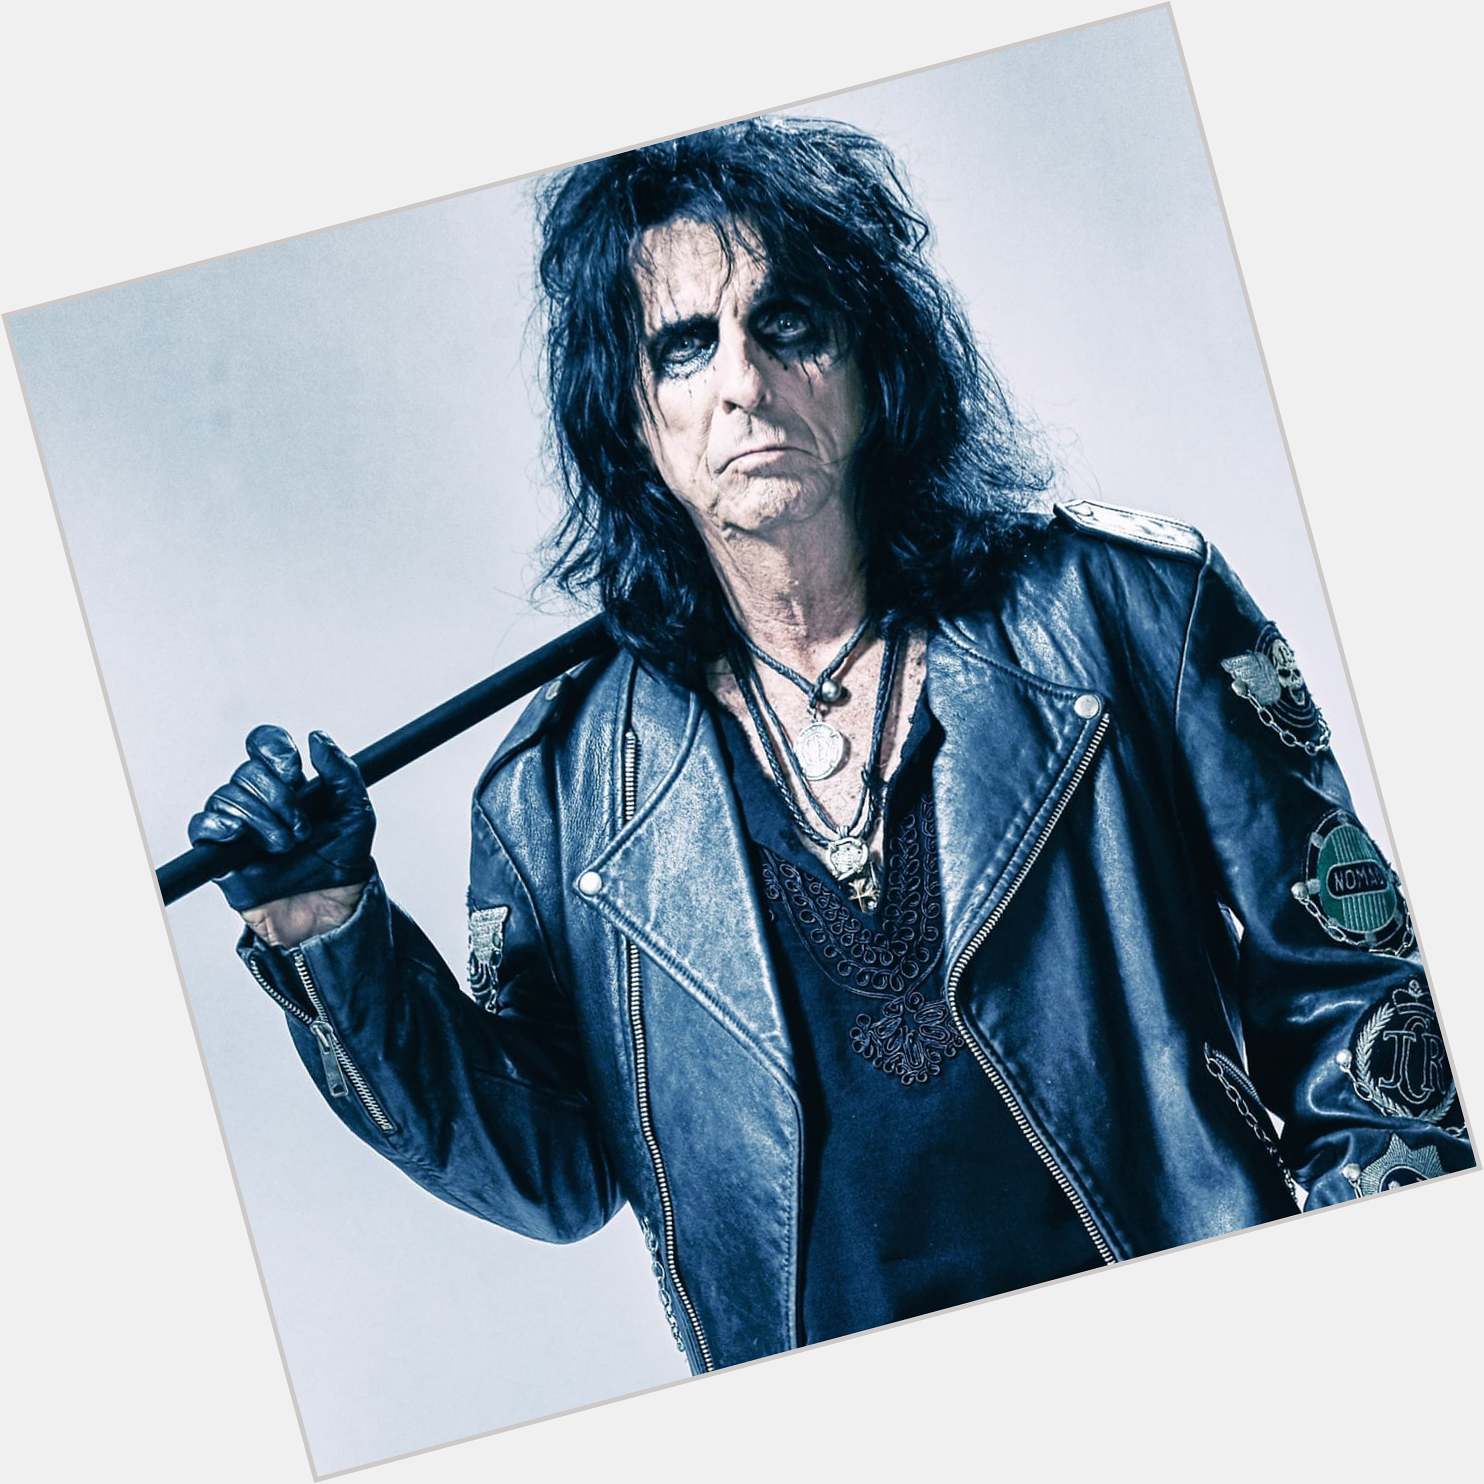 Please join me here at in wishing the one and only Alice Cooper a very Happy 73rd Birthday today  